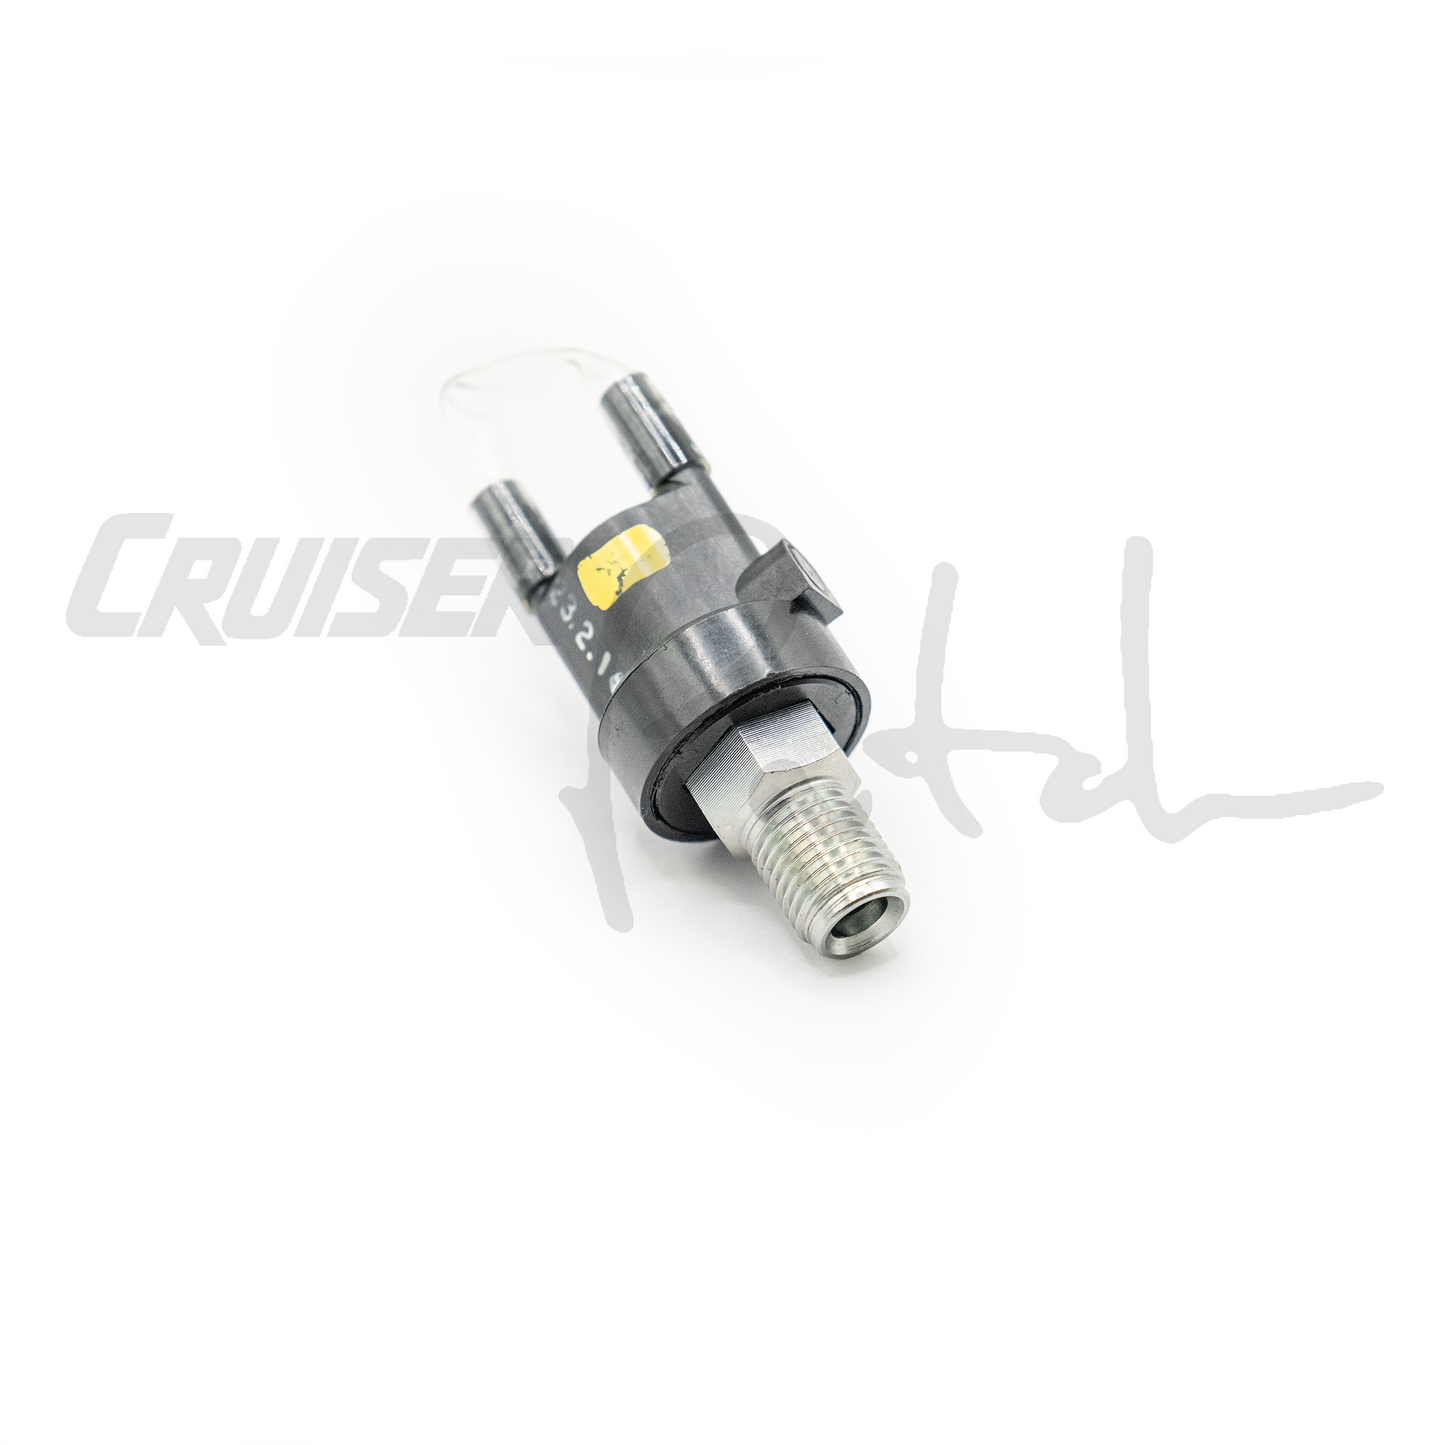 100 Series Power Steering air control valve assembly